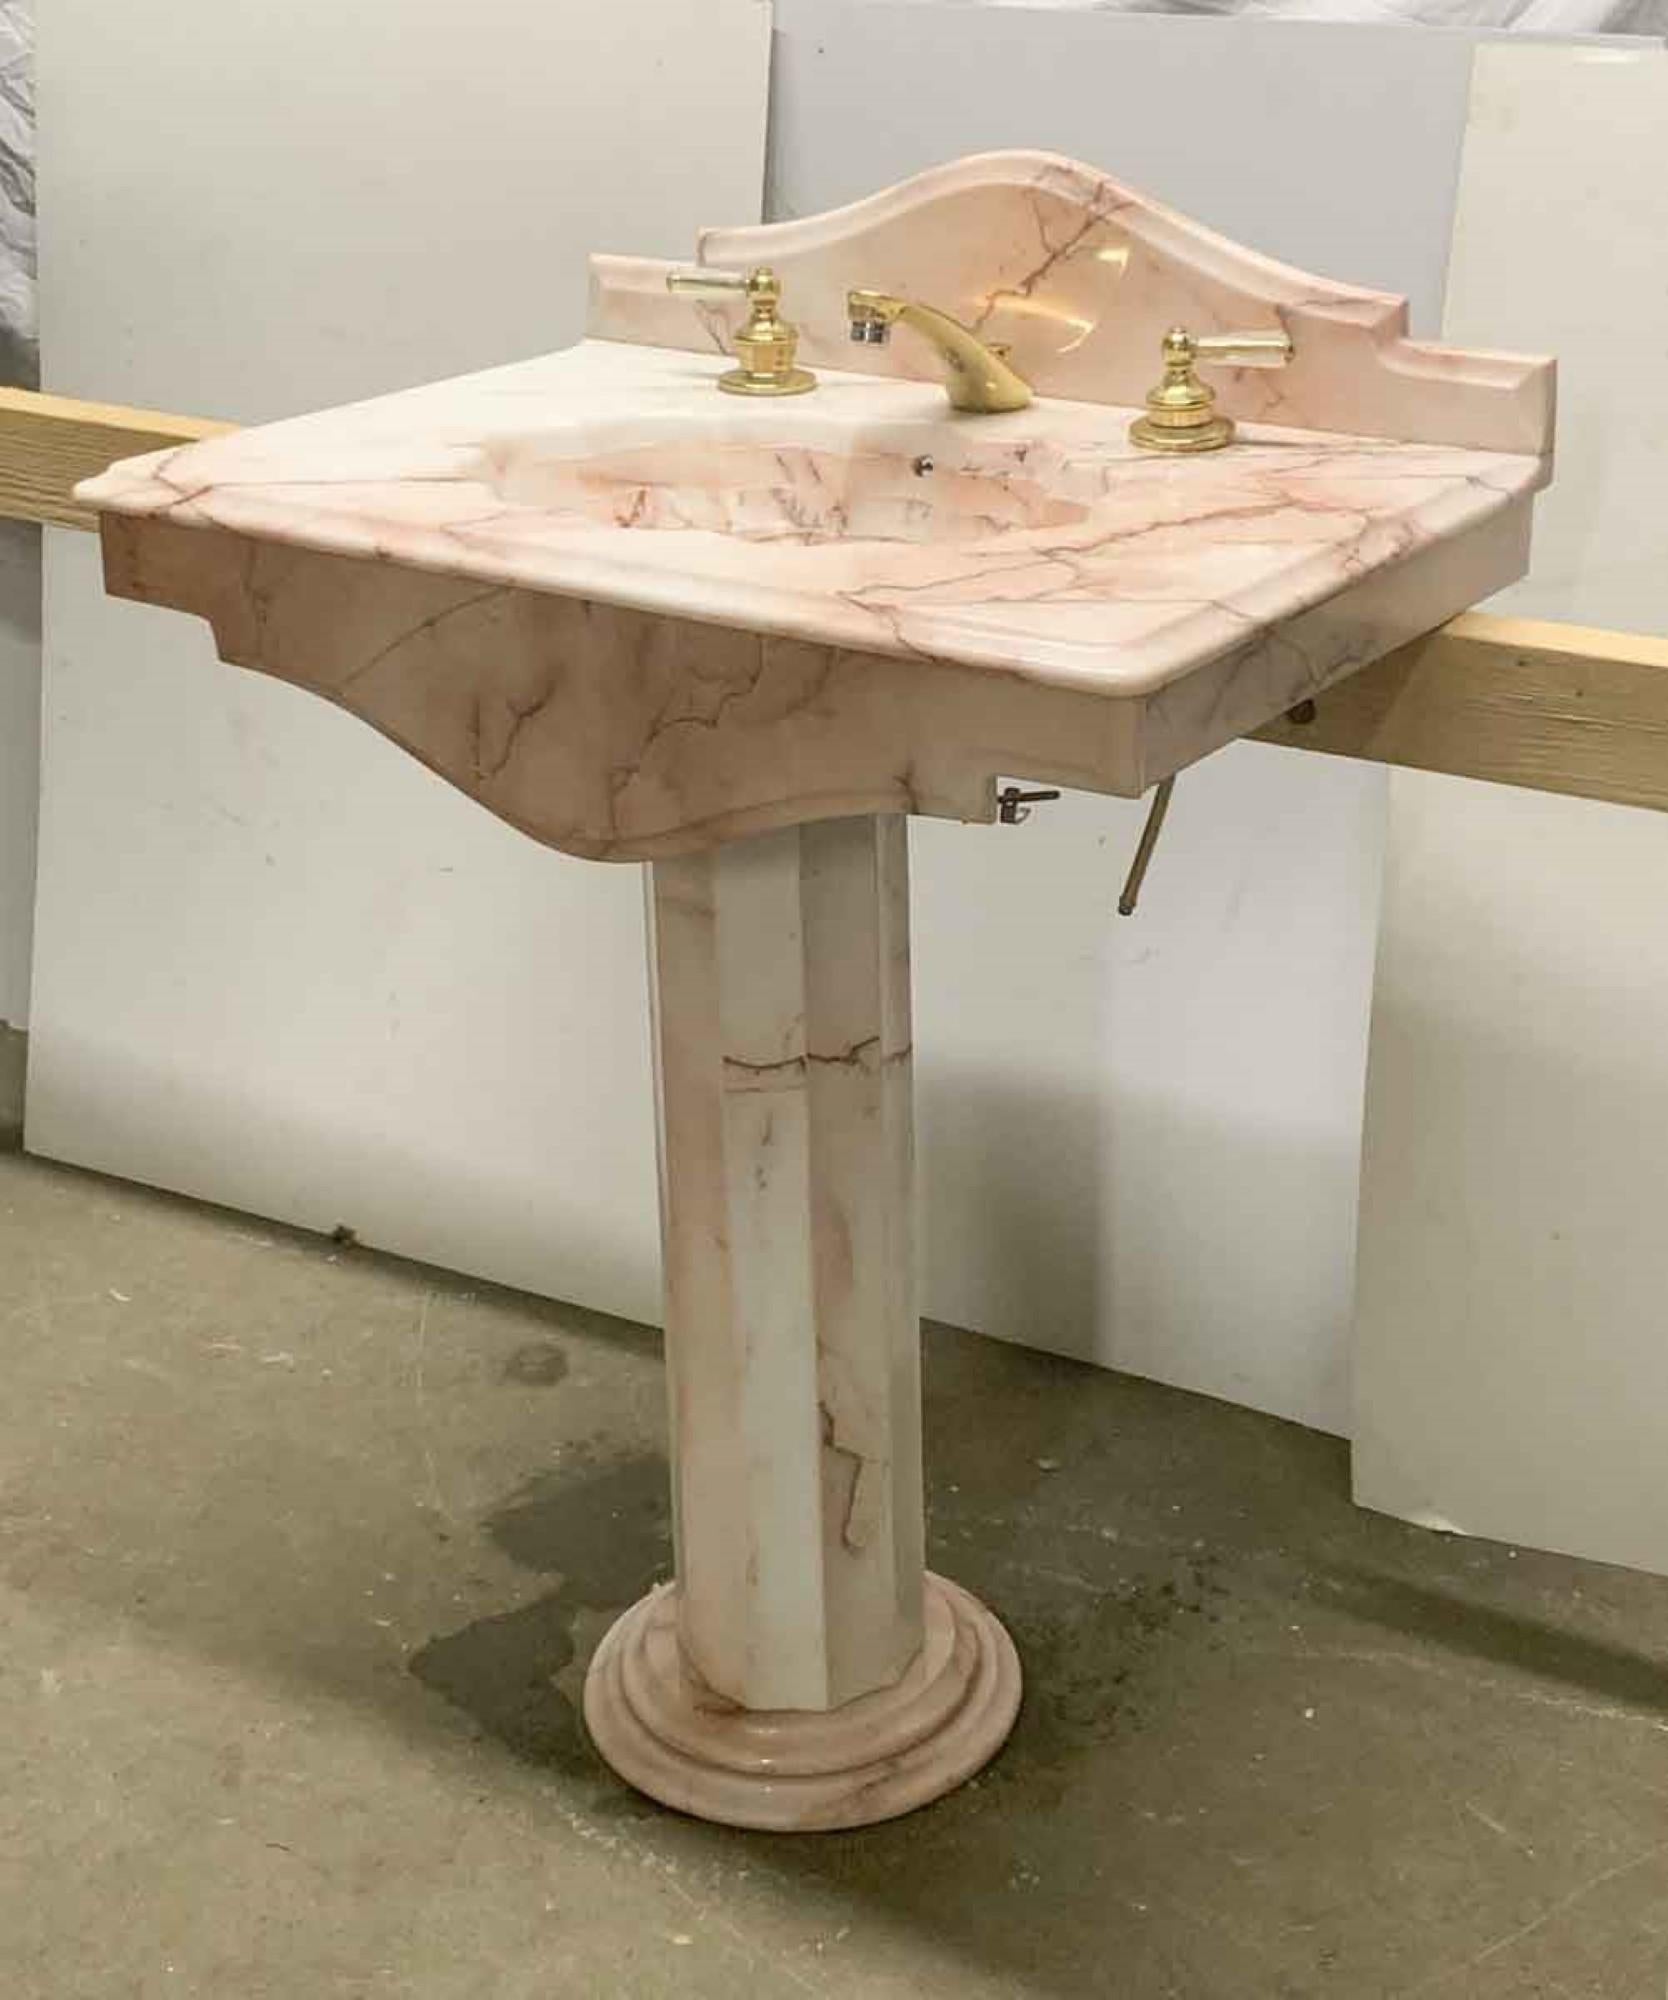 1990s solid rose colored marble pedestal sink with the original hardware. Features an arched backsplash. This can be seen at our 400 Gilligan St location in Scranton. PA.